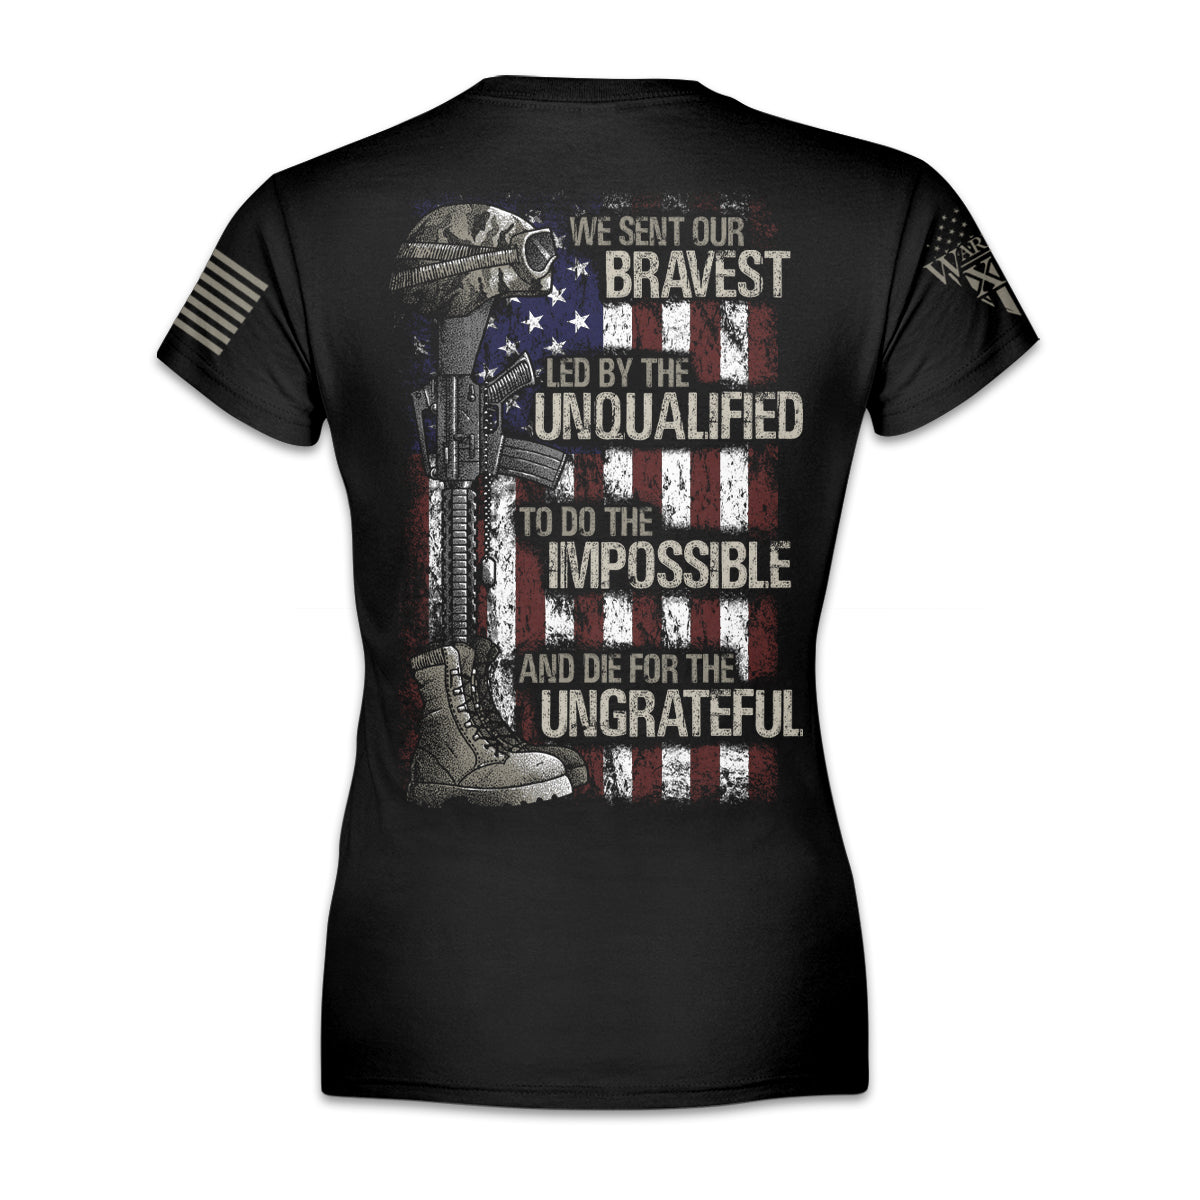 A black women's relaxed fit shirt with the words "We sent our bravest, Led by the unqualified, To do the impossible, And die for the ungrateful" with a USA flag, soldiers boot, helmet and gun printed on the back of shirt.